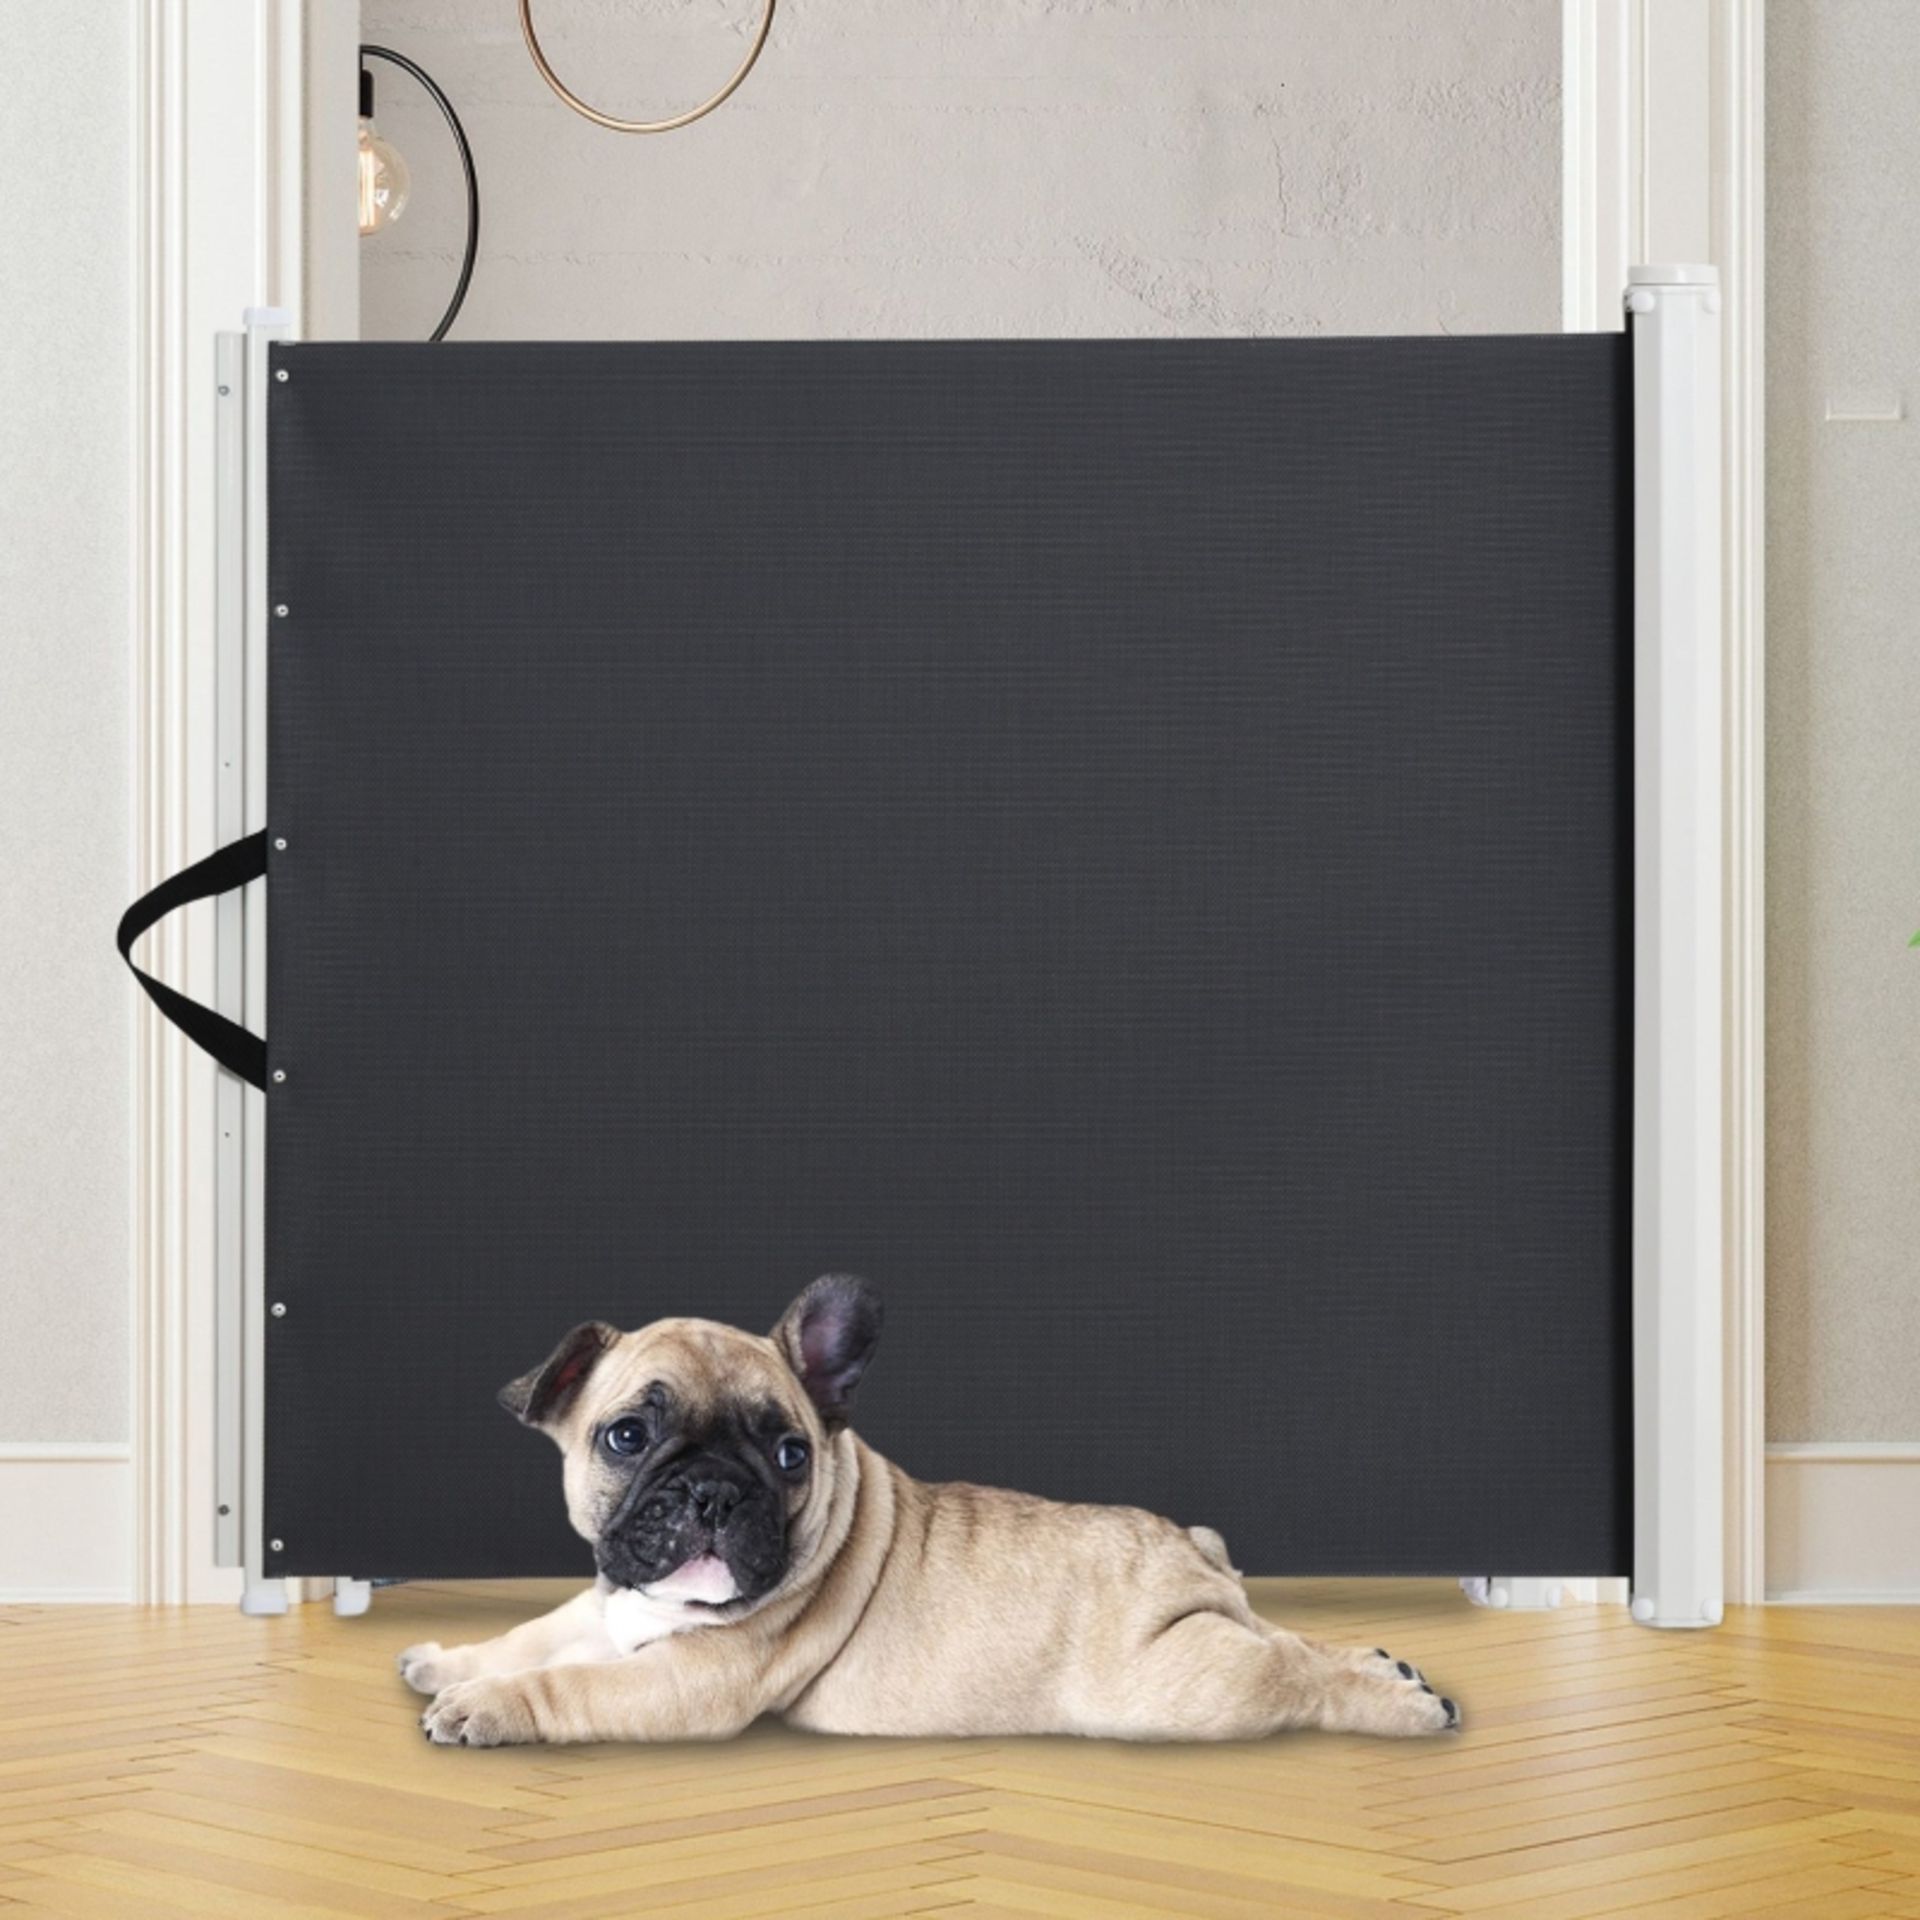 RRP £ 61.99 - PawHut Retractable Safety Gate Dog Pet Barrier Folding Protector Home Doorway Room